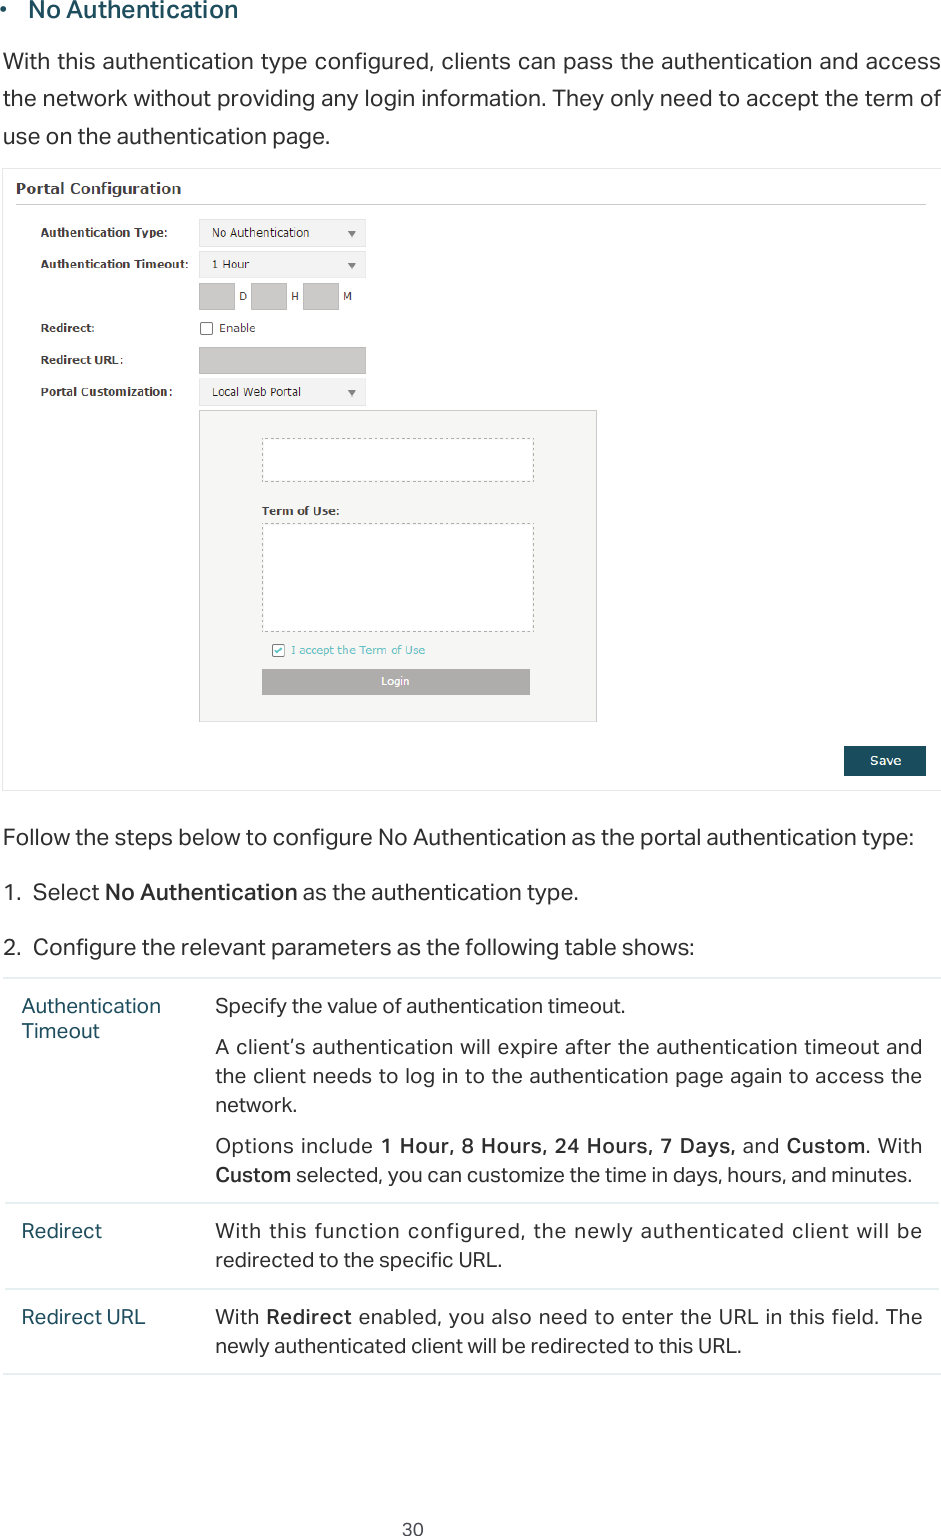  30̝g1R$XWKHQWLFDWLRQWith this authentication type configured, clients can pass the authentication and access the network without providing any login information. They only need to accept the term of use on the authentication page.Follow the steps below to configure No Authentication as the portal authentication type:̝Select 1R$XWKHQWLFDWLRQ as the authentication type.̝Configure the relevant parameters as the following table shows:Authentication TimeoutSpecify the value of authentication timeout.A client’s authentication will expire after the authentication timeout and the client needs to log in to the authentication page again to access the network.Options include+RXU+RXUV+RXUV&apos;D\V and Custom. With Custom selected, you can customize the time in days, hours, and minutes.Redirect With  this  function configured, the  newly  authenticated client  will  be redirected to the specific URL.Redirect URL With5HGLUHFW enabled, you also need to enter the URL in this field. The newly authenticated client will be redirected to this URL.